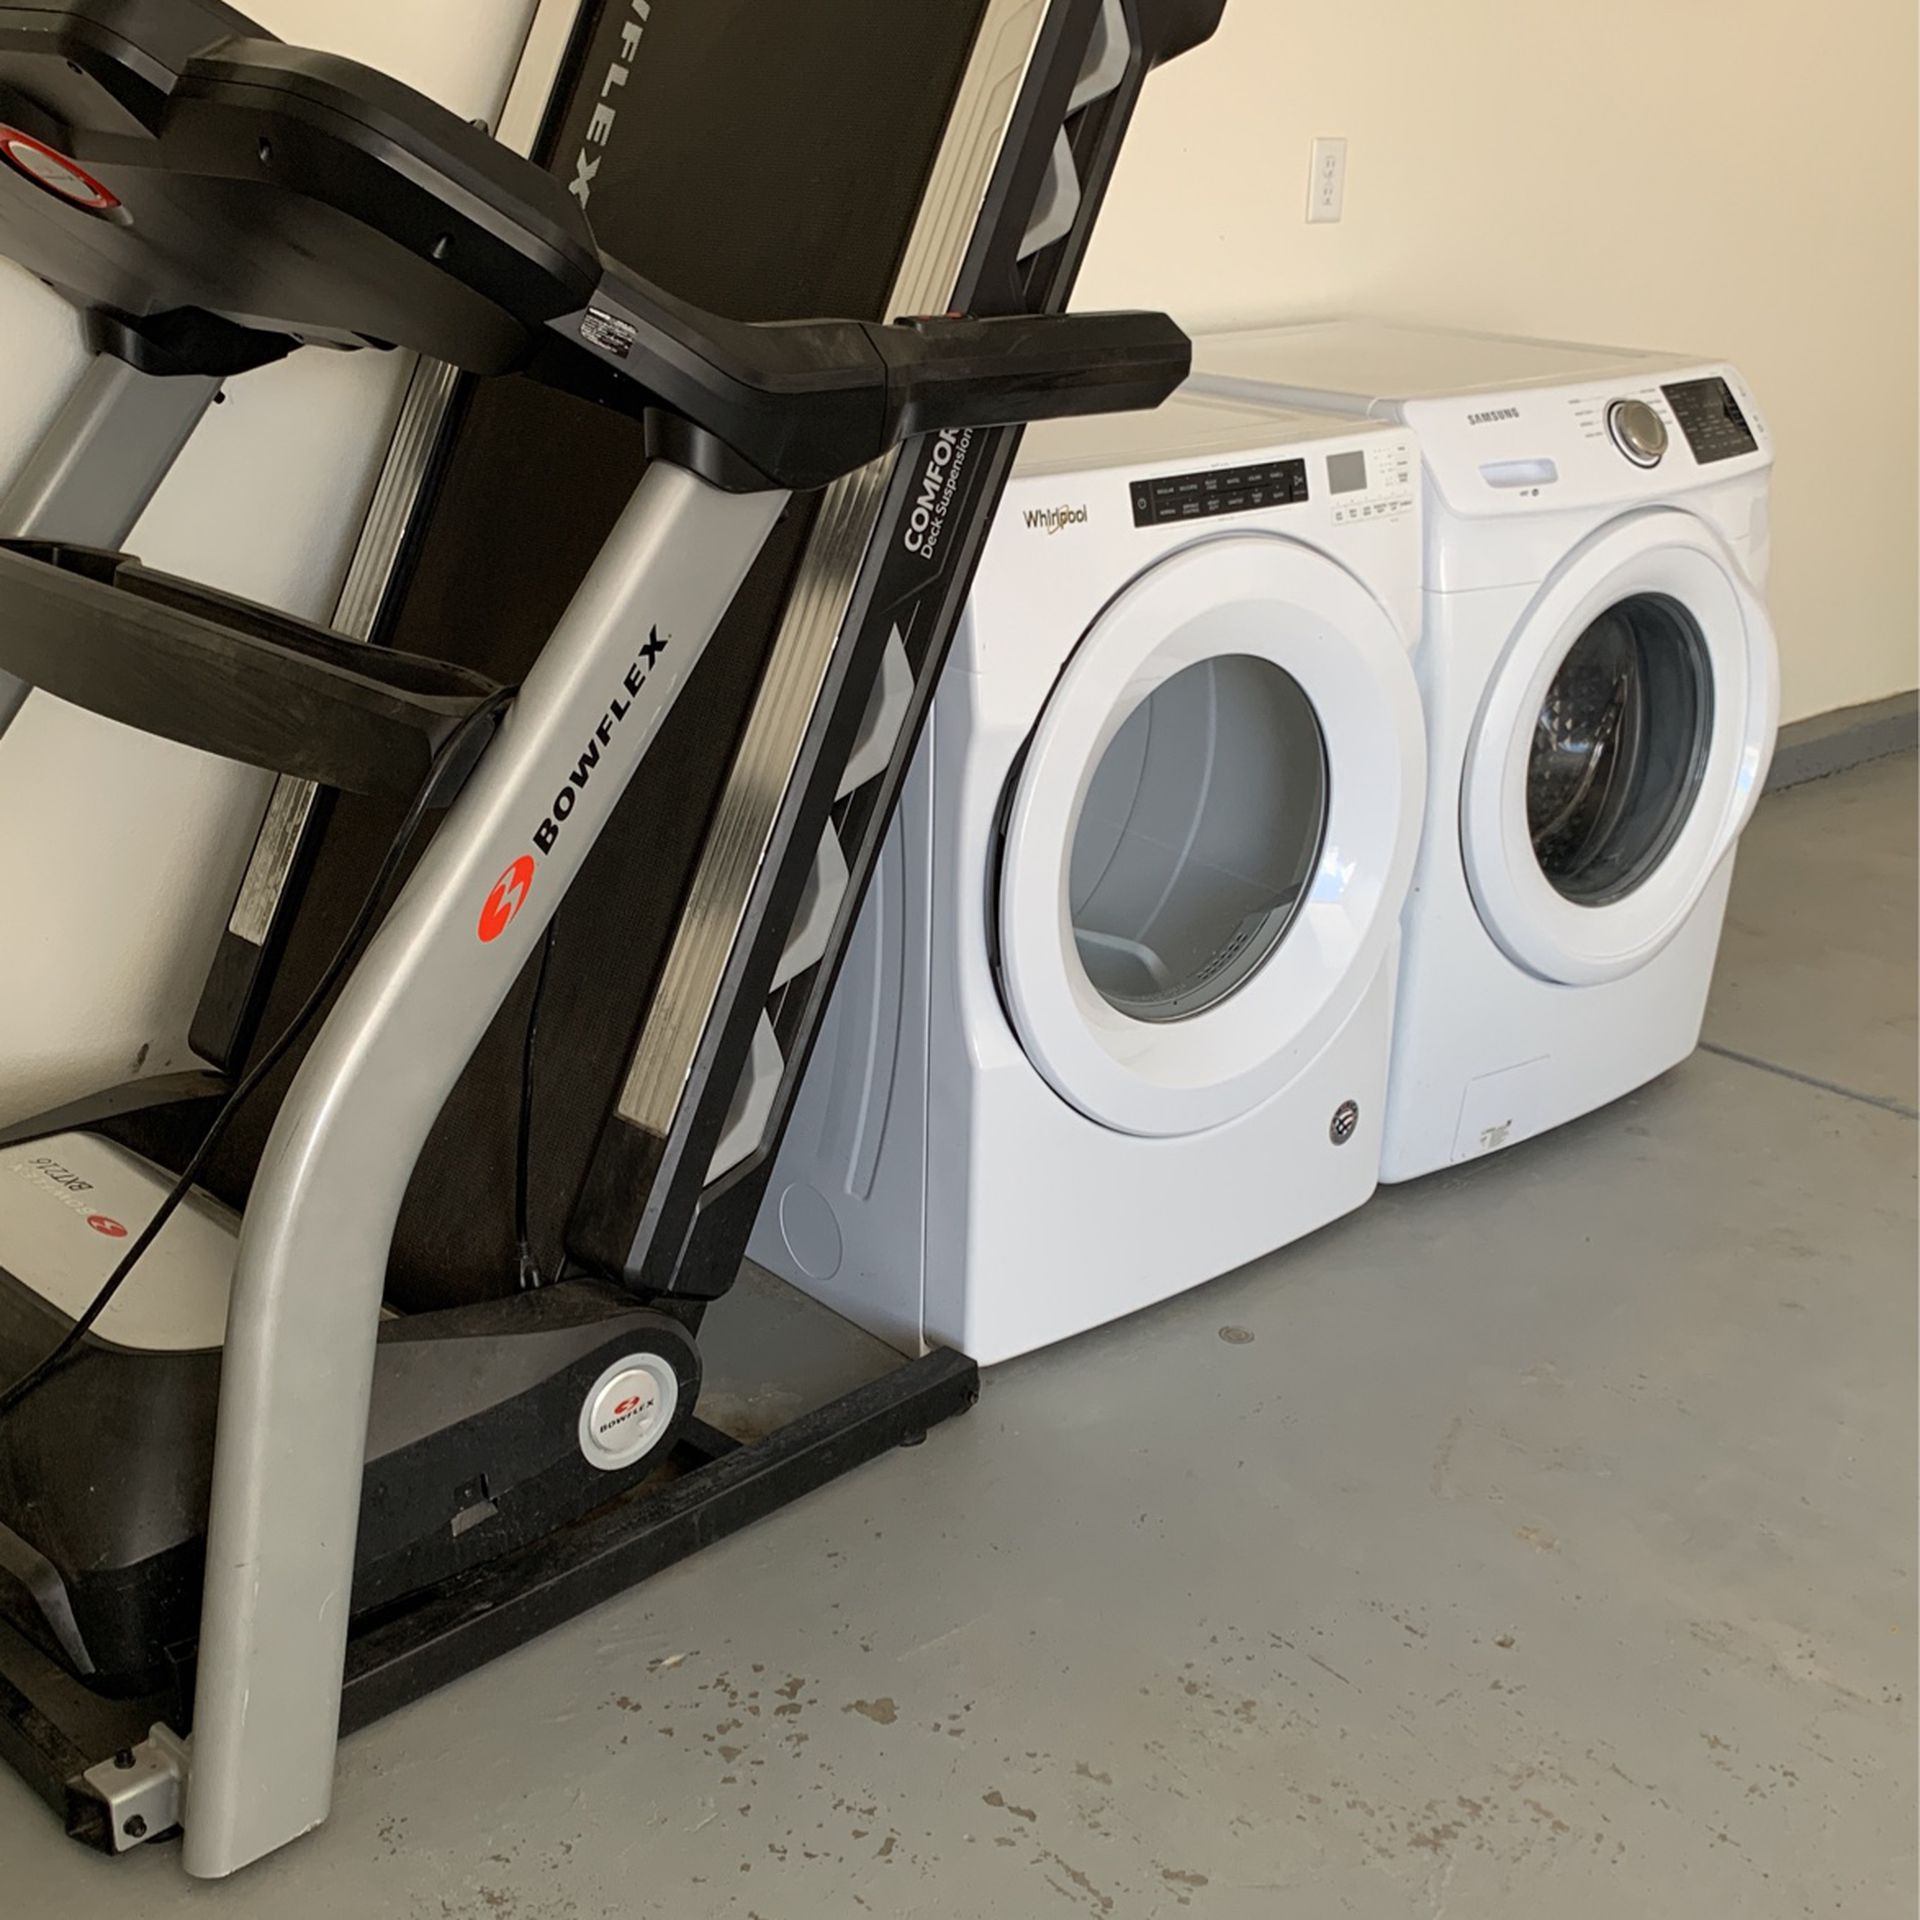 Free washer, dryer And Treadmill 